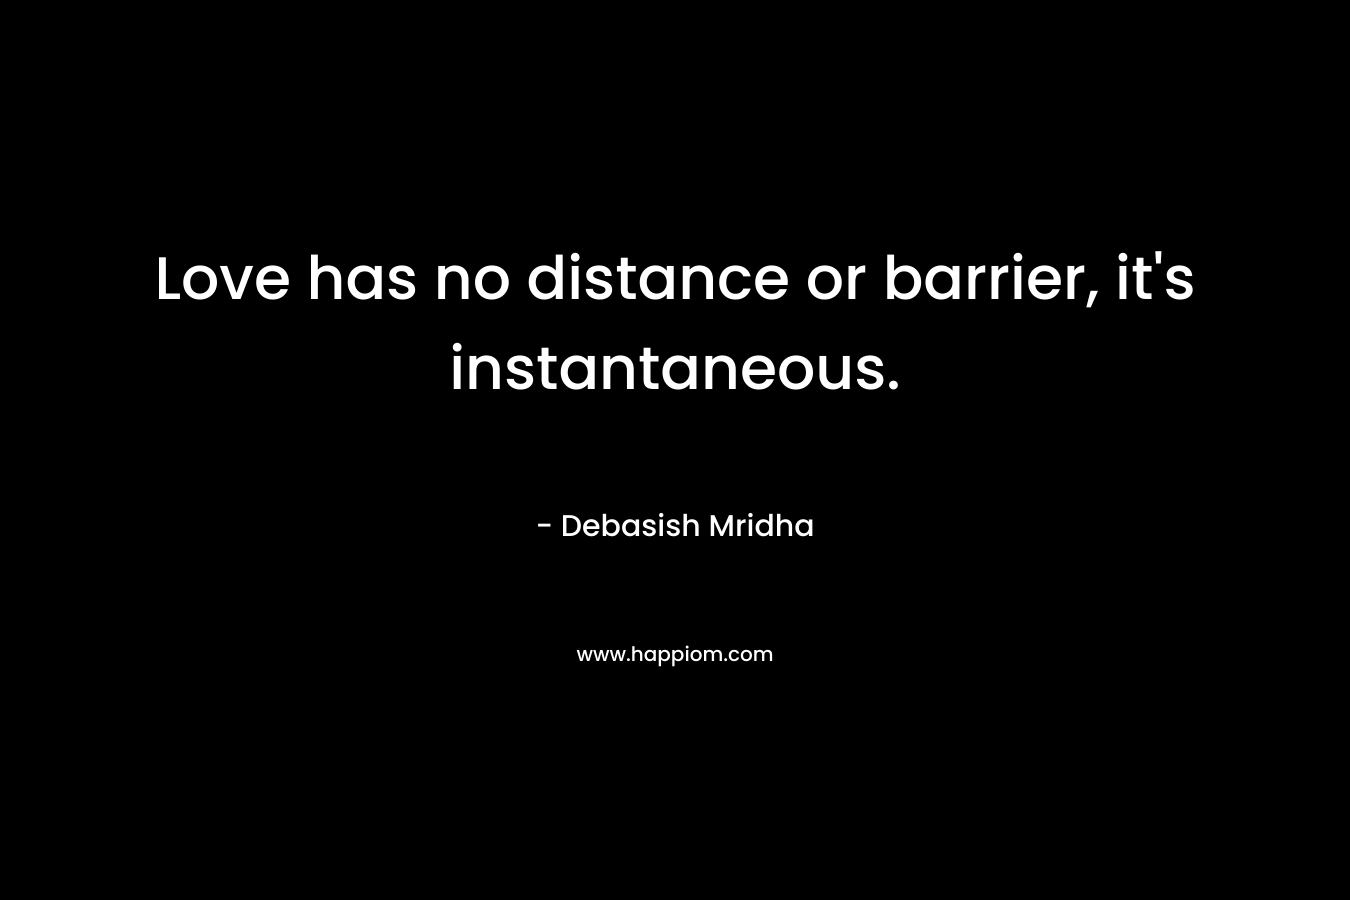 Love has no distance or barrier, it's instantaneous.